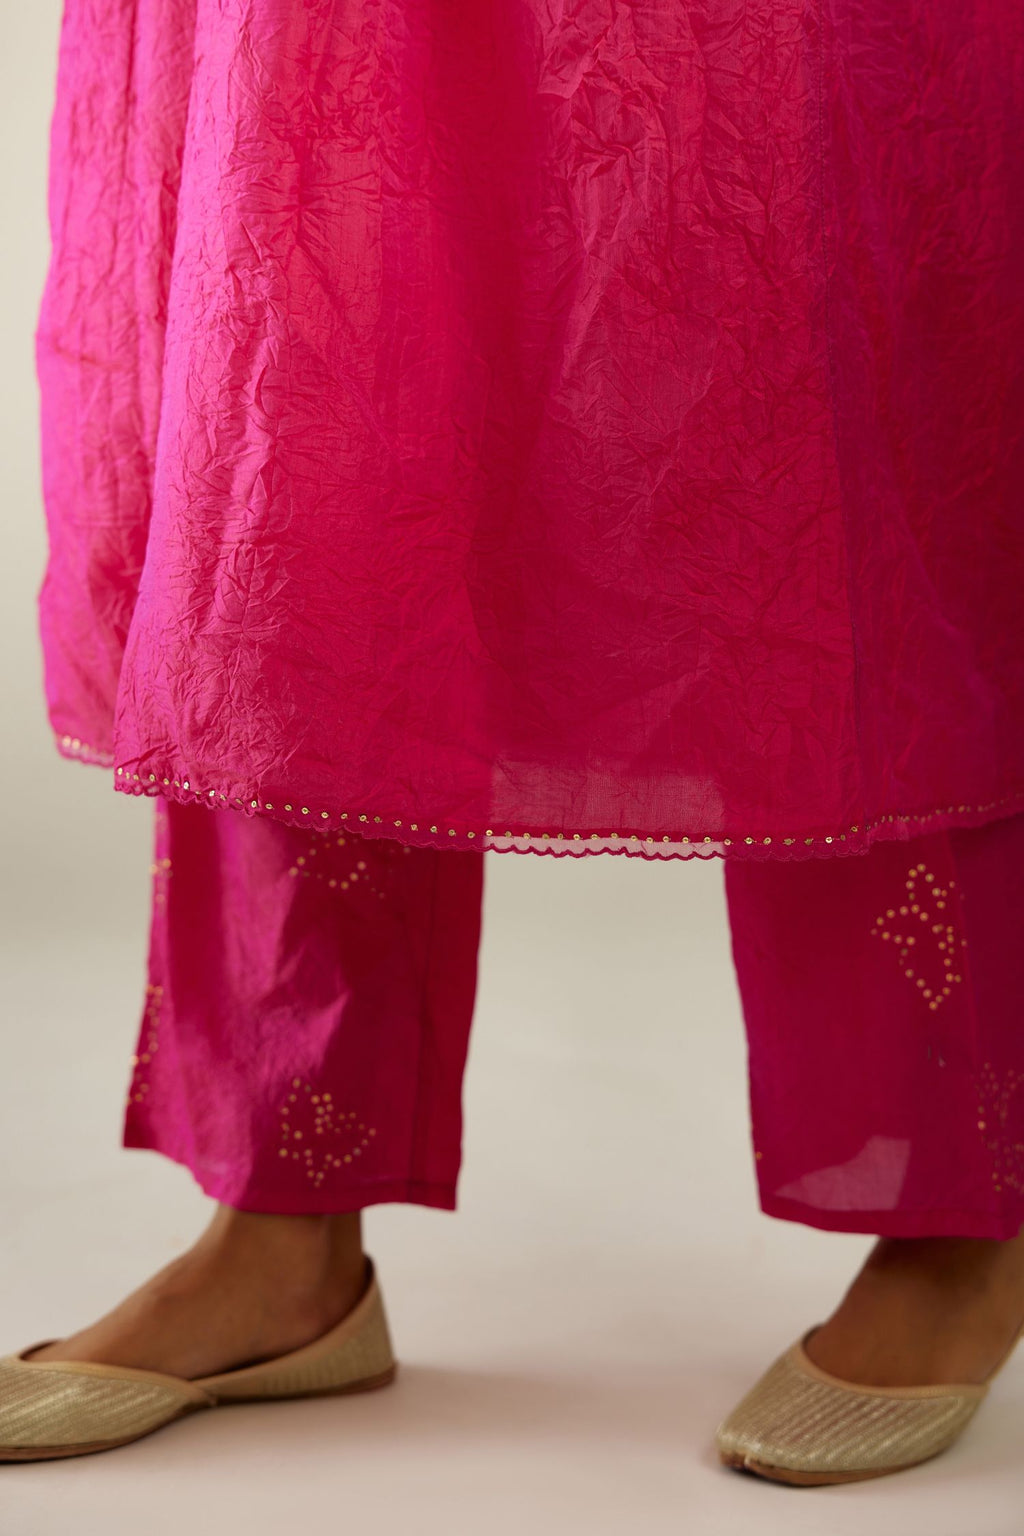 Raspberry silk hand crushed V neck gathered kurta set, highlighted with gold sequins and embroidered scalloped organza at edges.